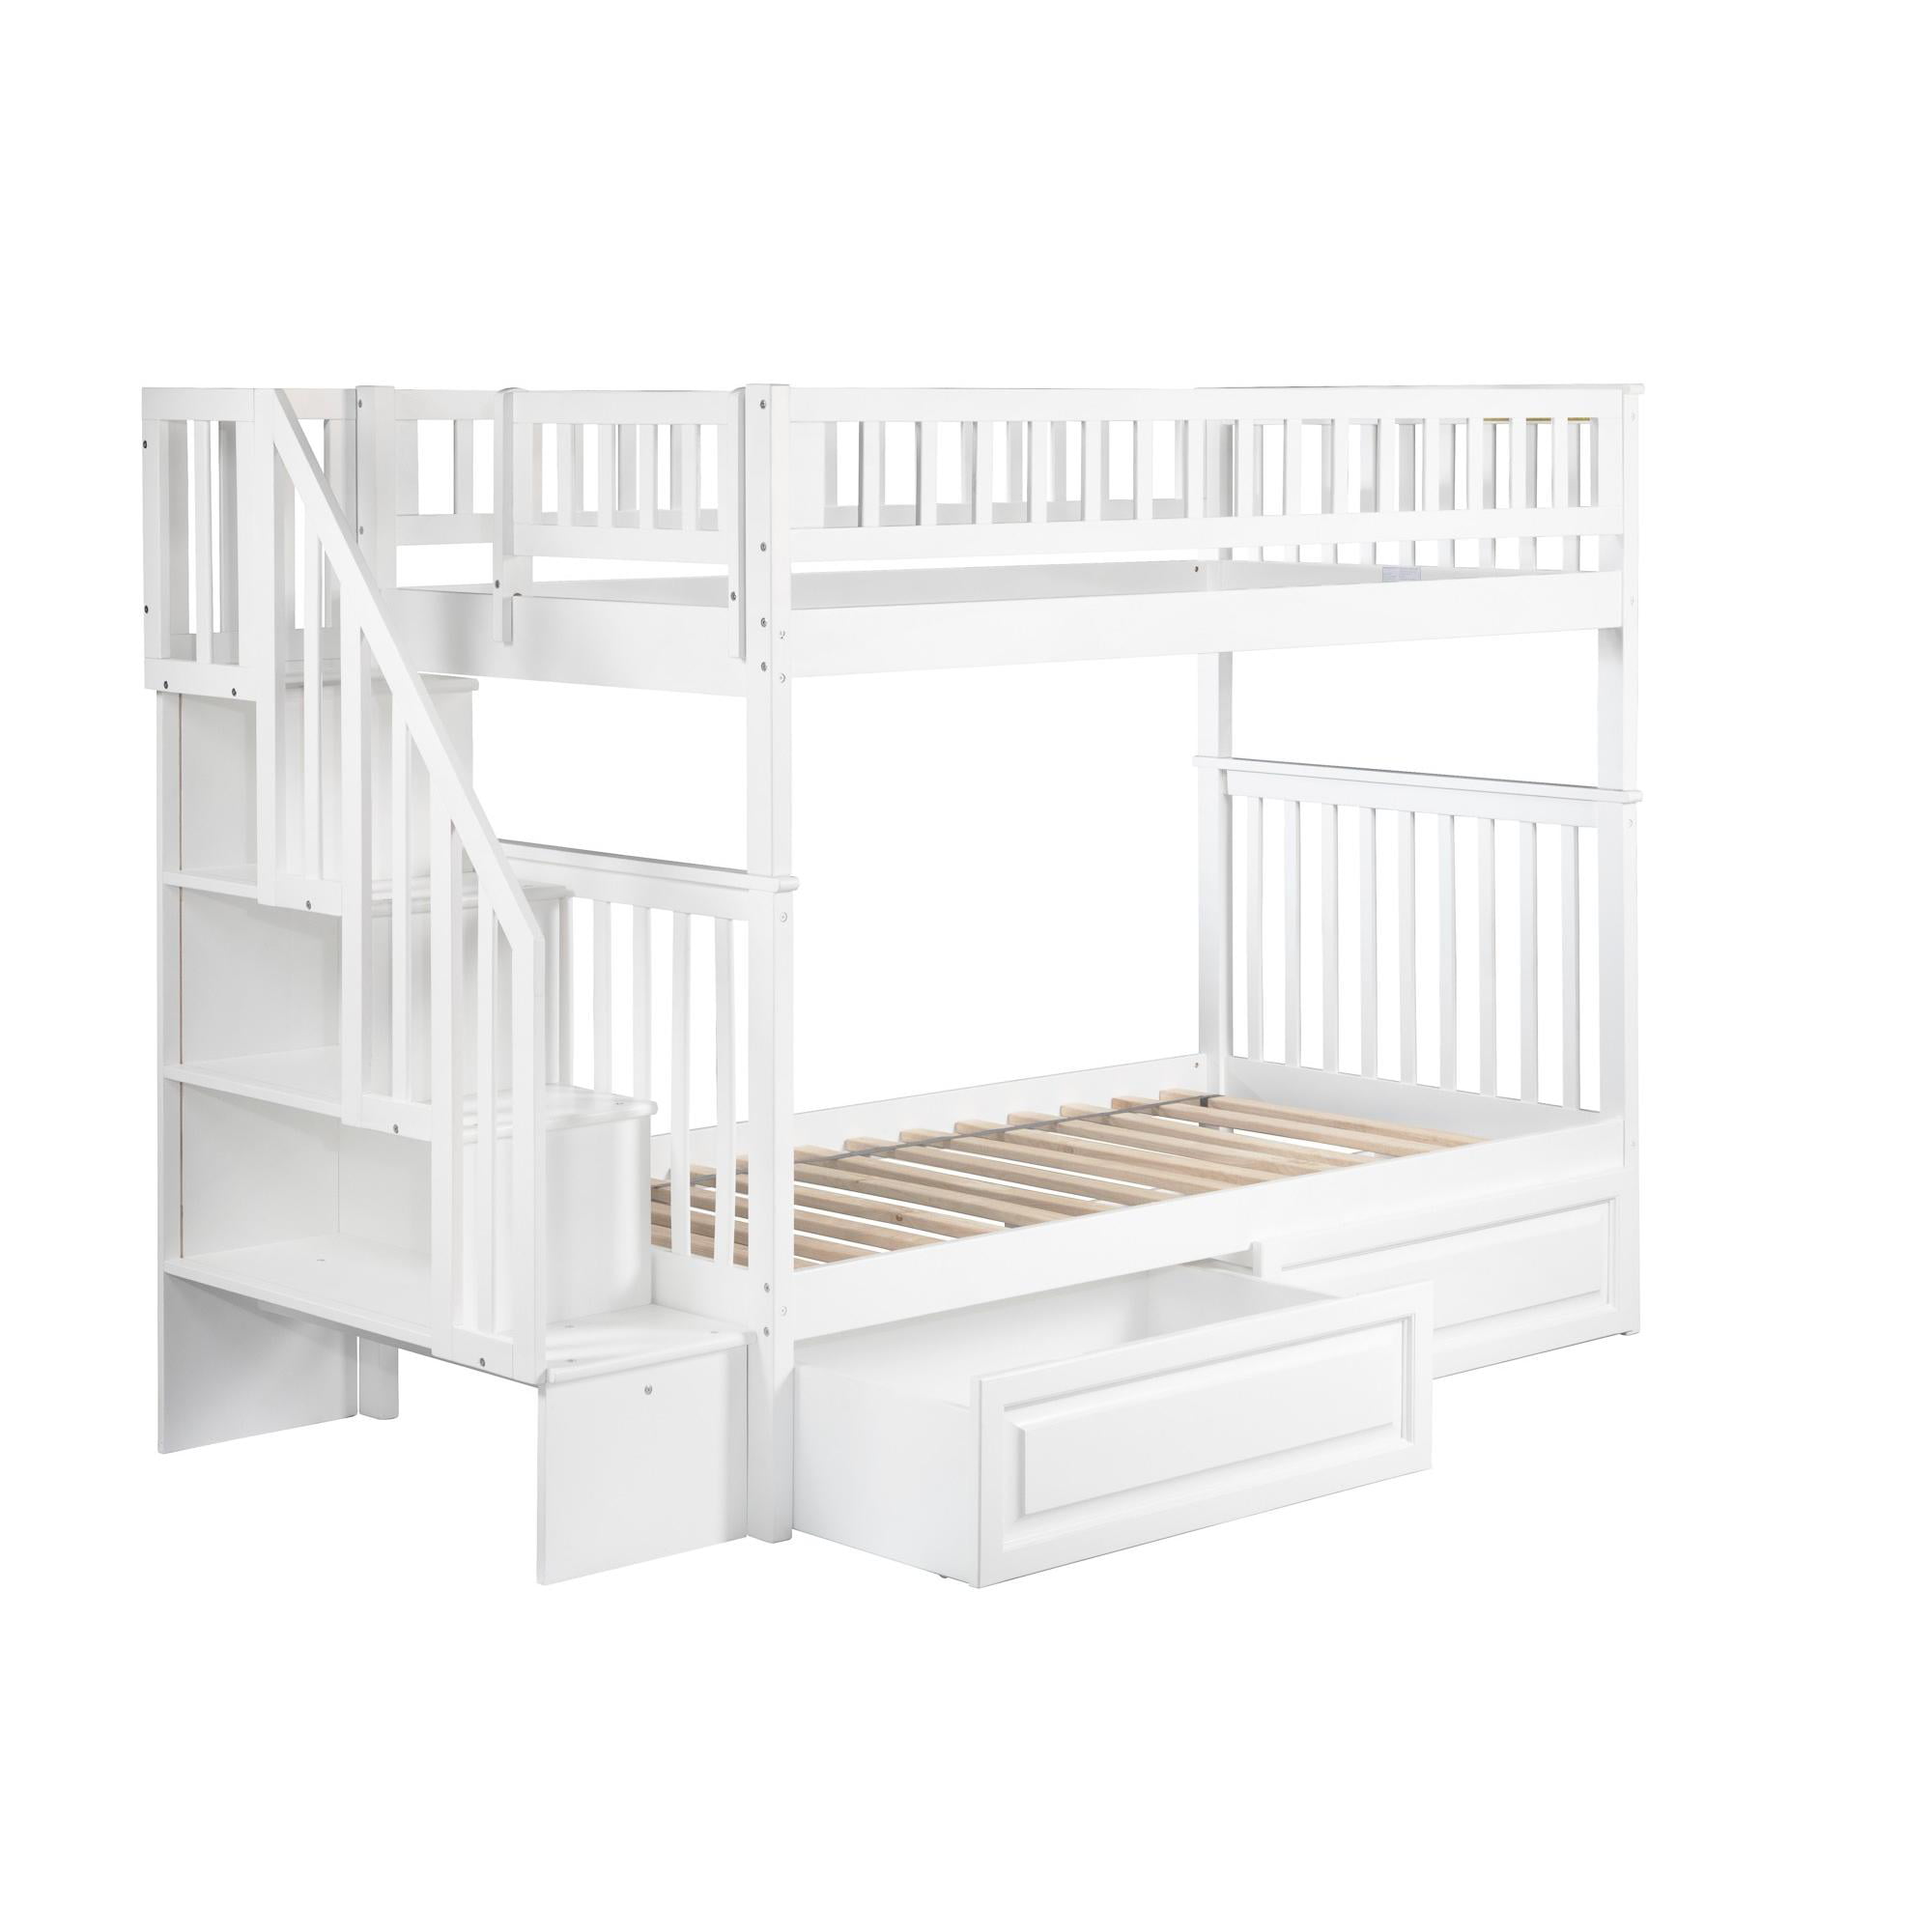 Picture of Atlantic Furniture AB56622 Woodland Staircase Bunk Bed with Raised Panel Bed Drawers, White